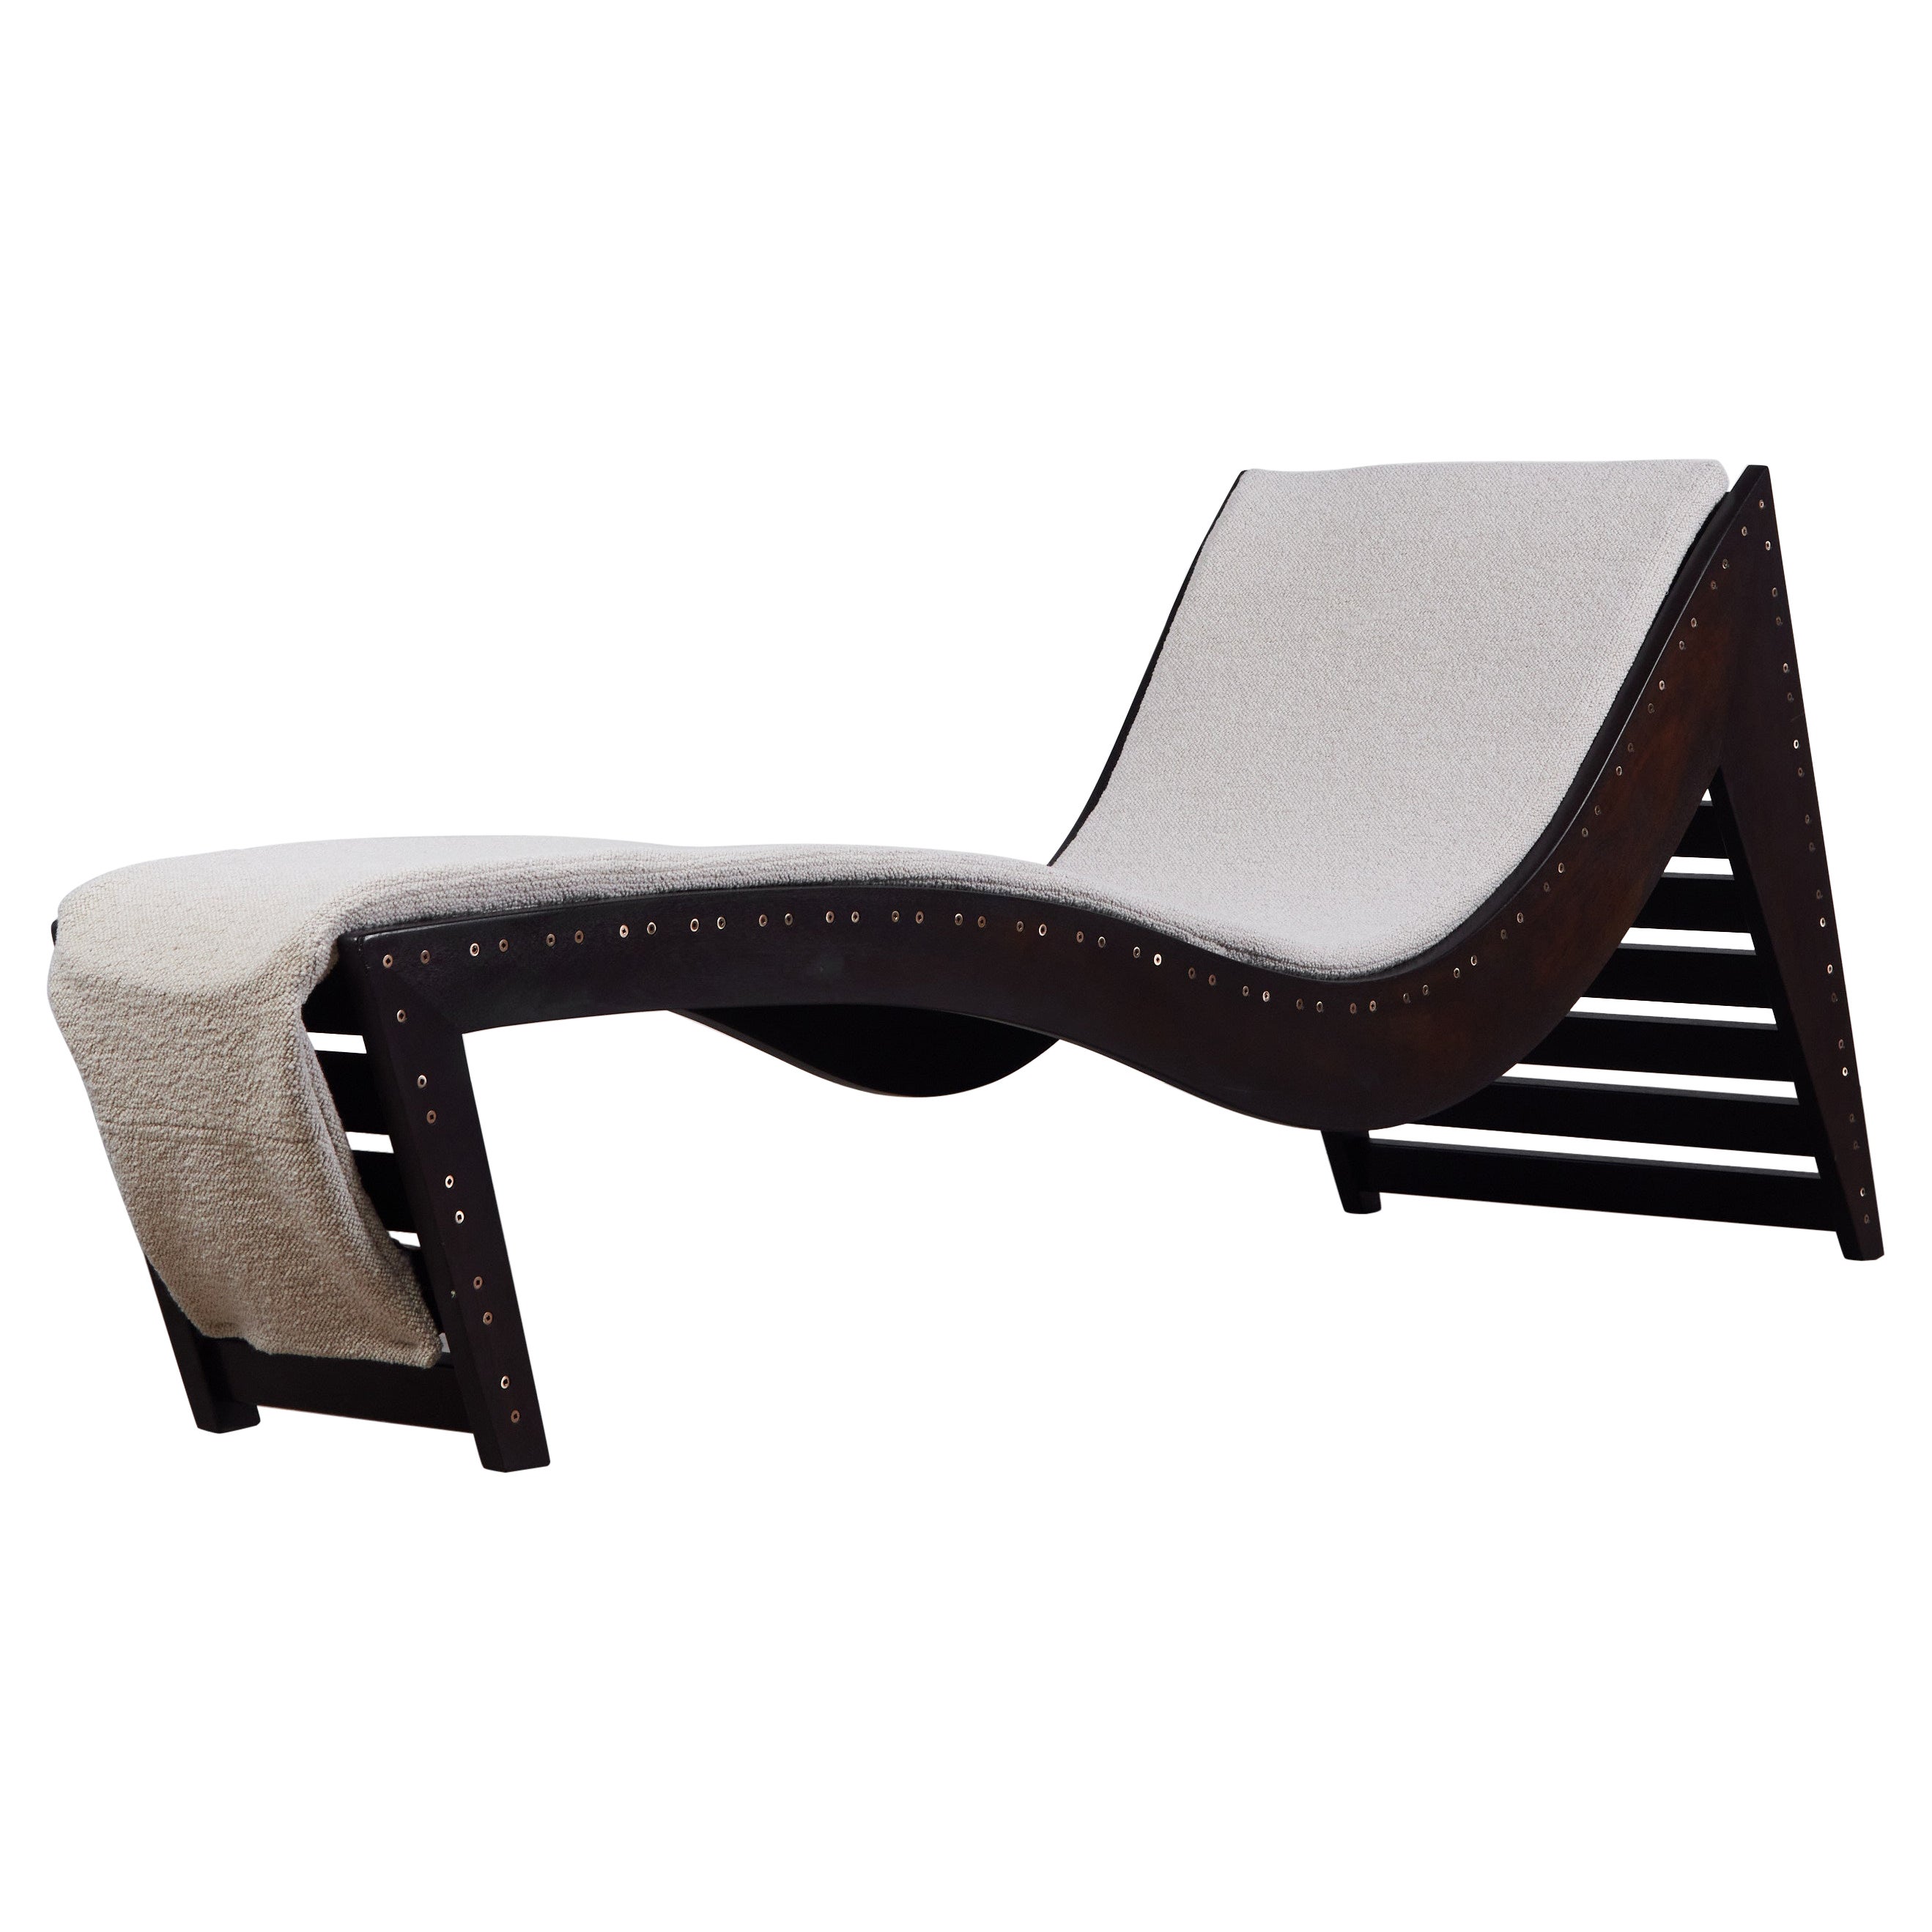 Martin Simpson Boucle Chaise Lounge For Sale